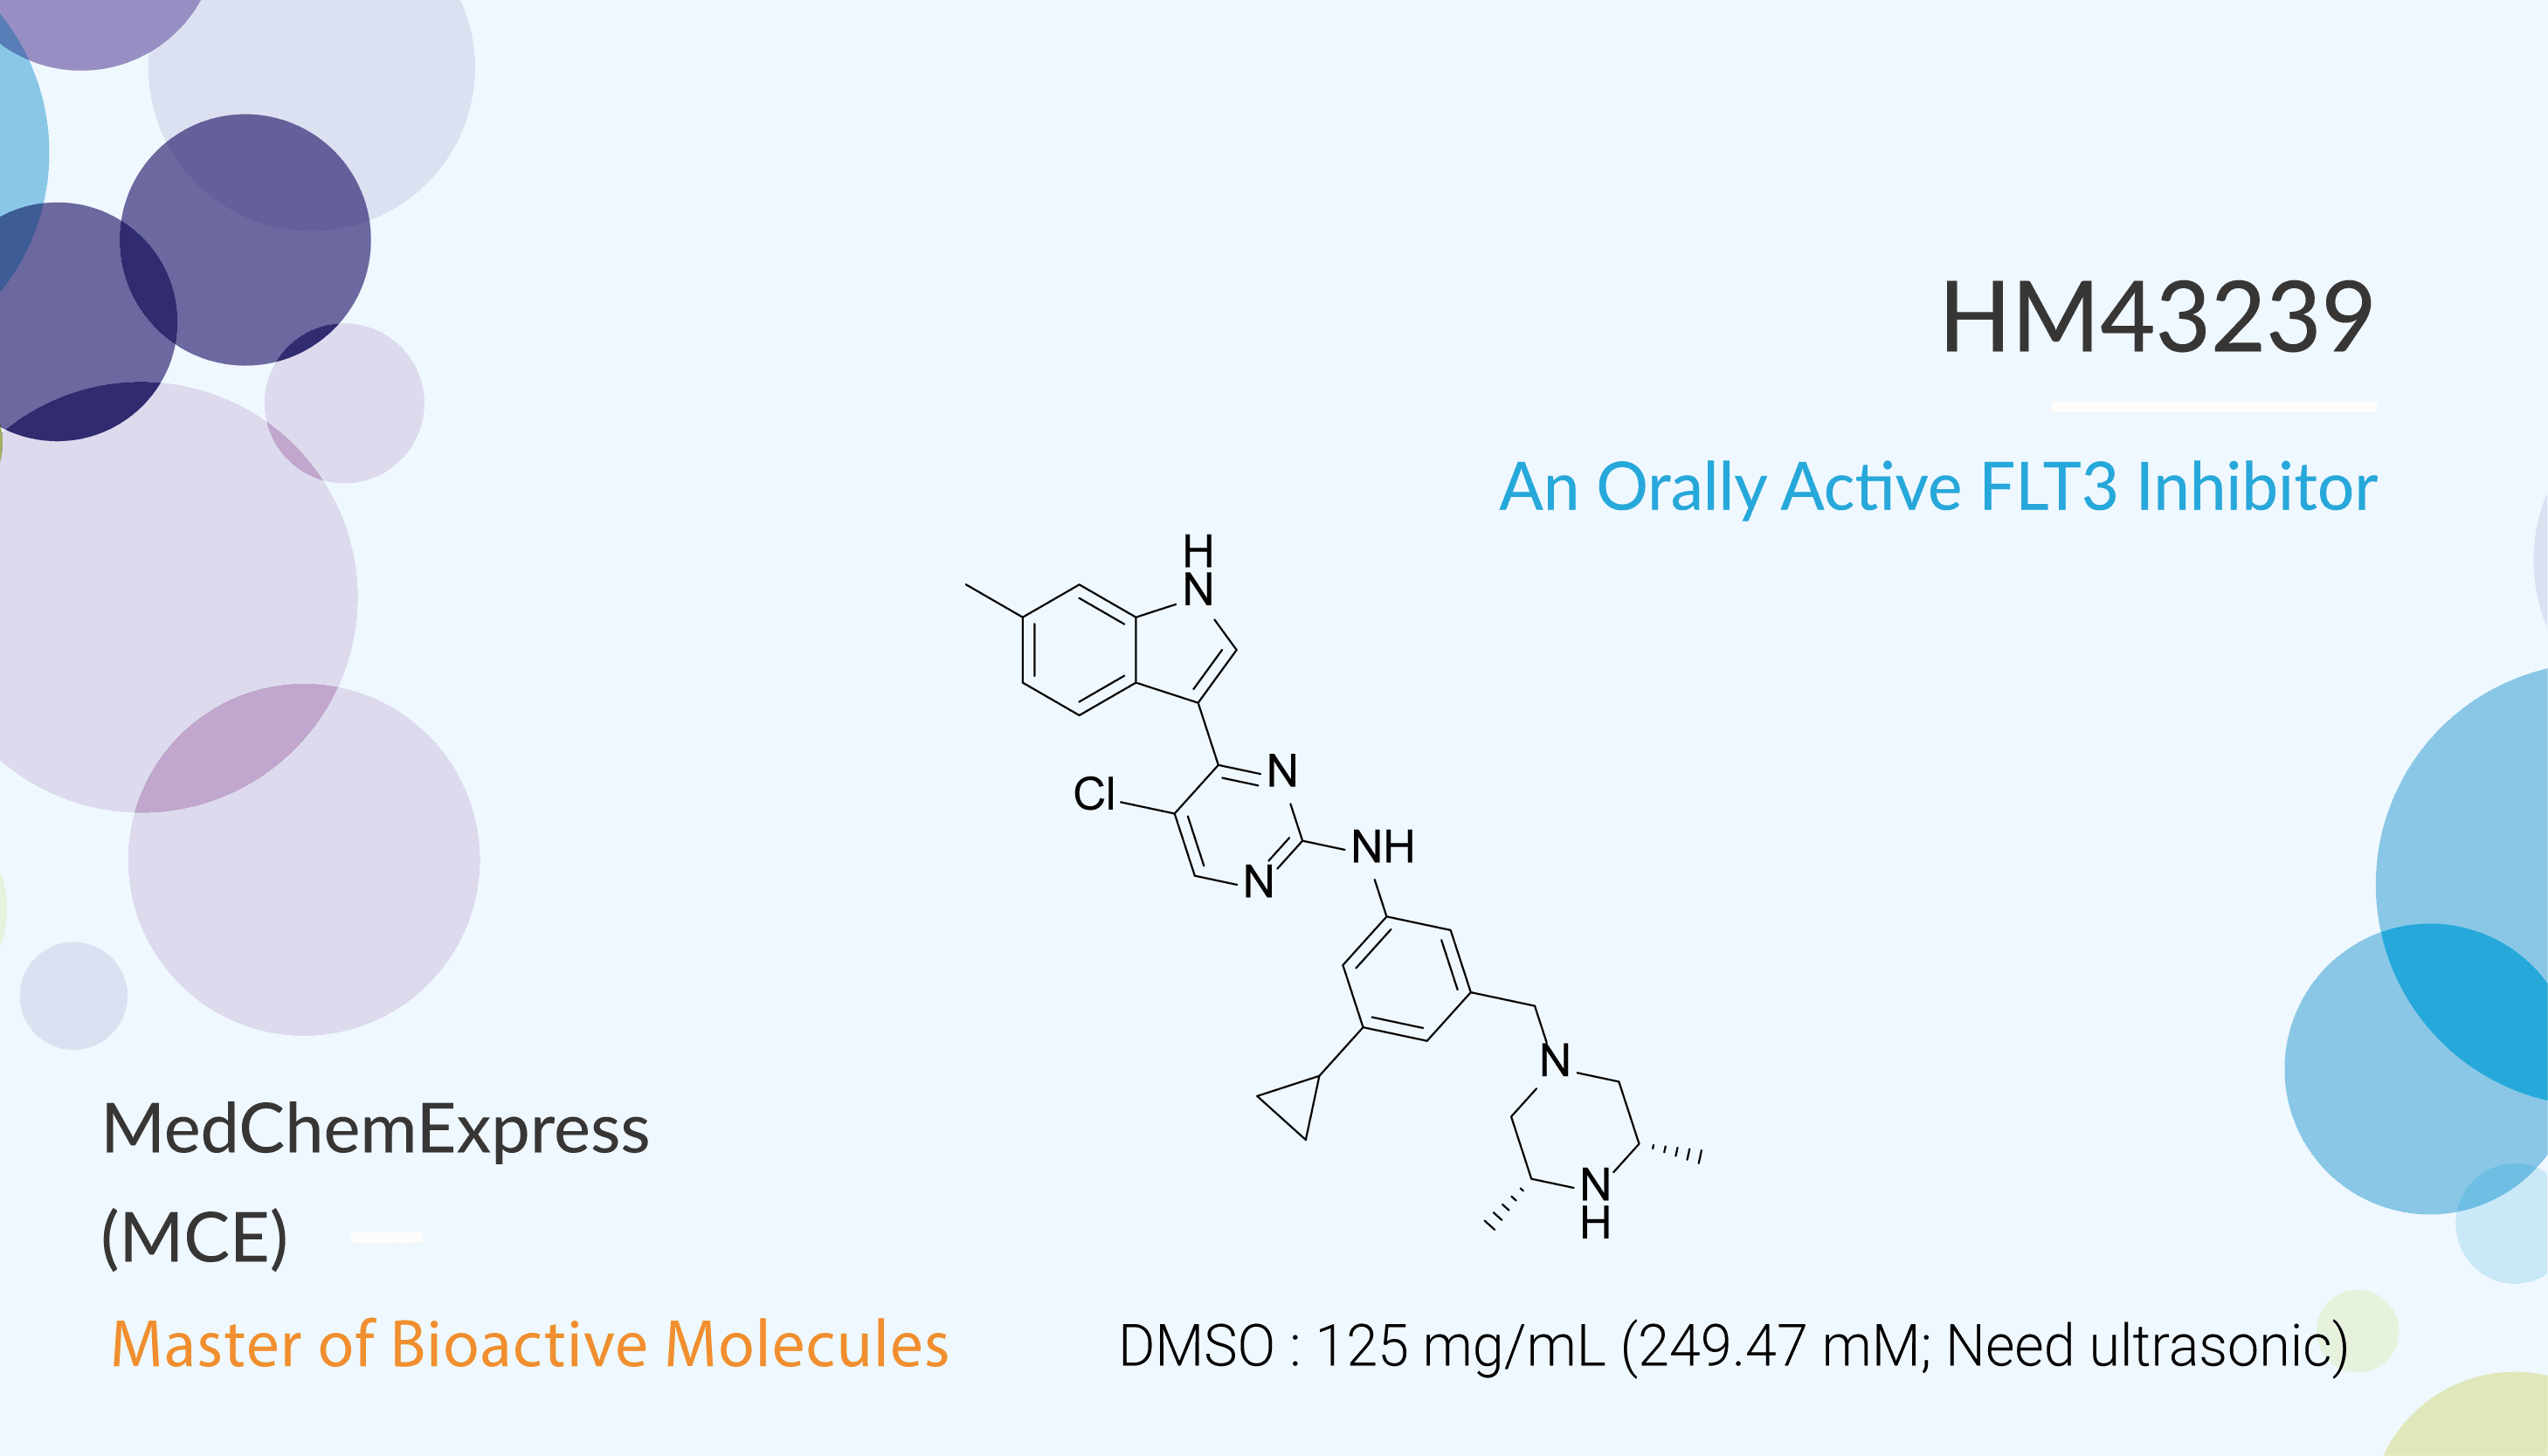 HM43239 is an Orally Active and Selective FLT3 Inhibitor 2022 02 07 - HM43239 is an Orally Active and Selective FLT3 Inhibitor